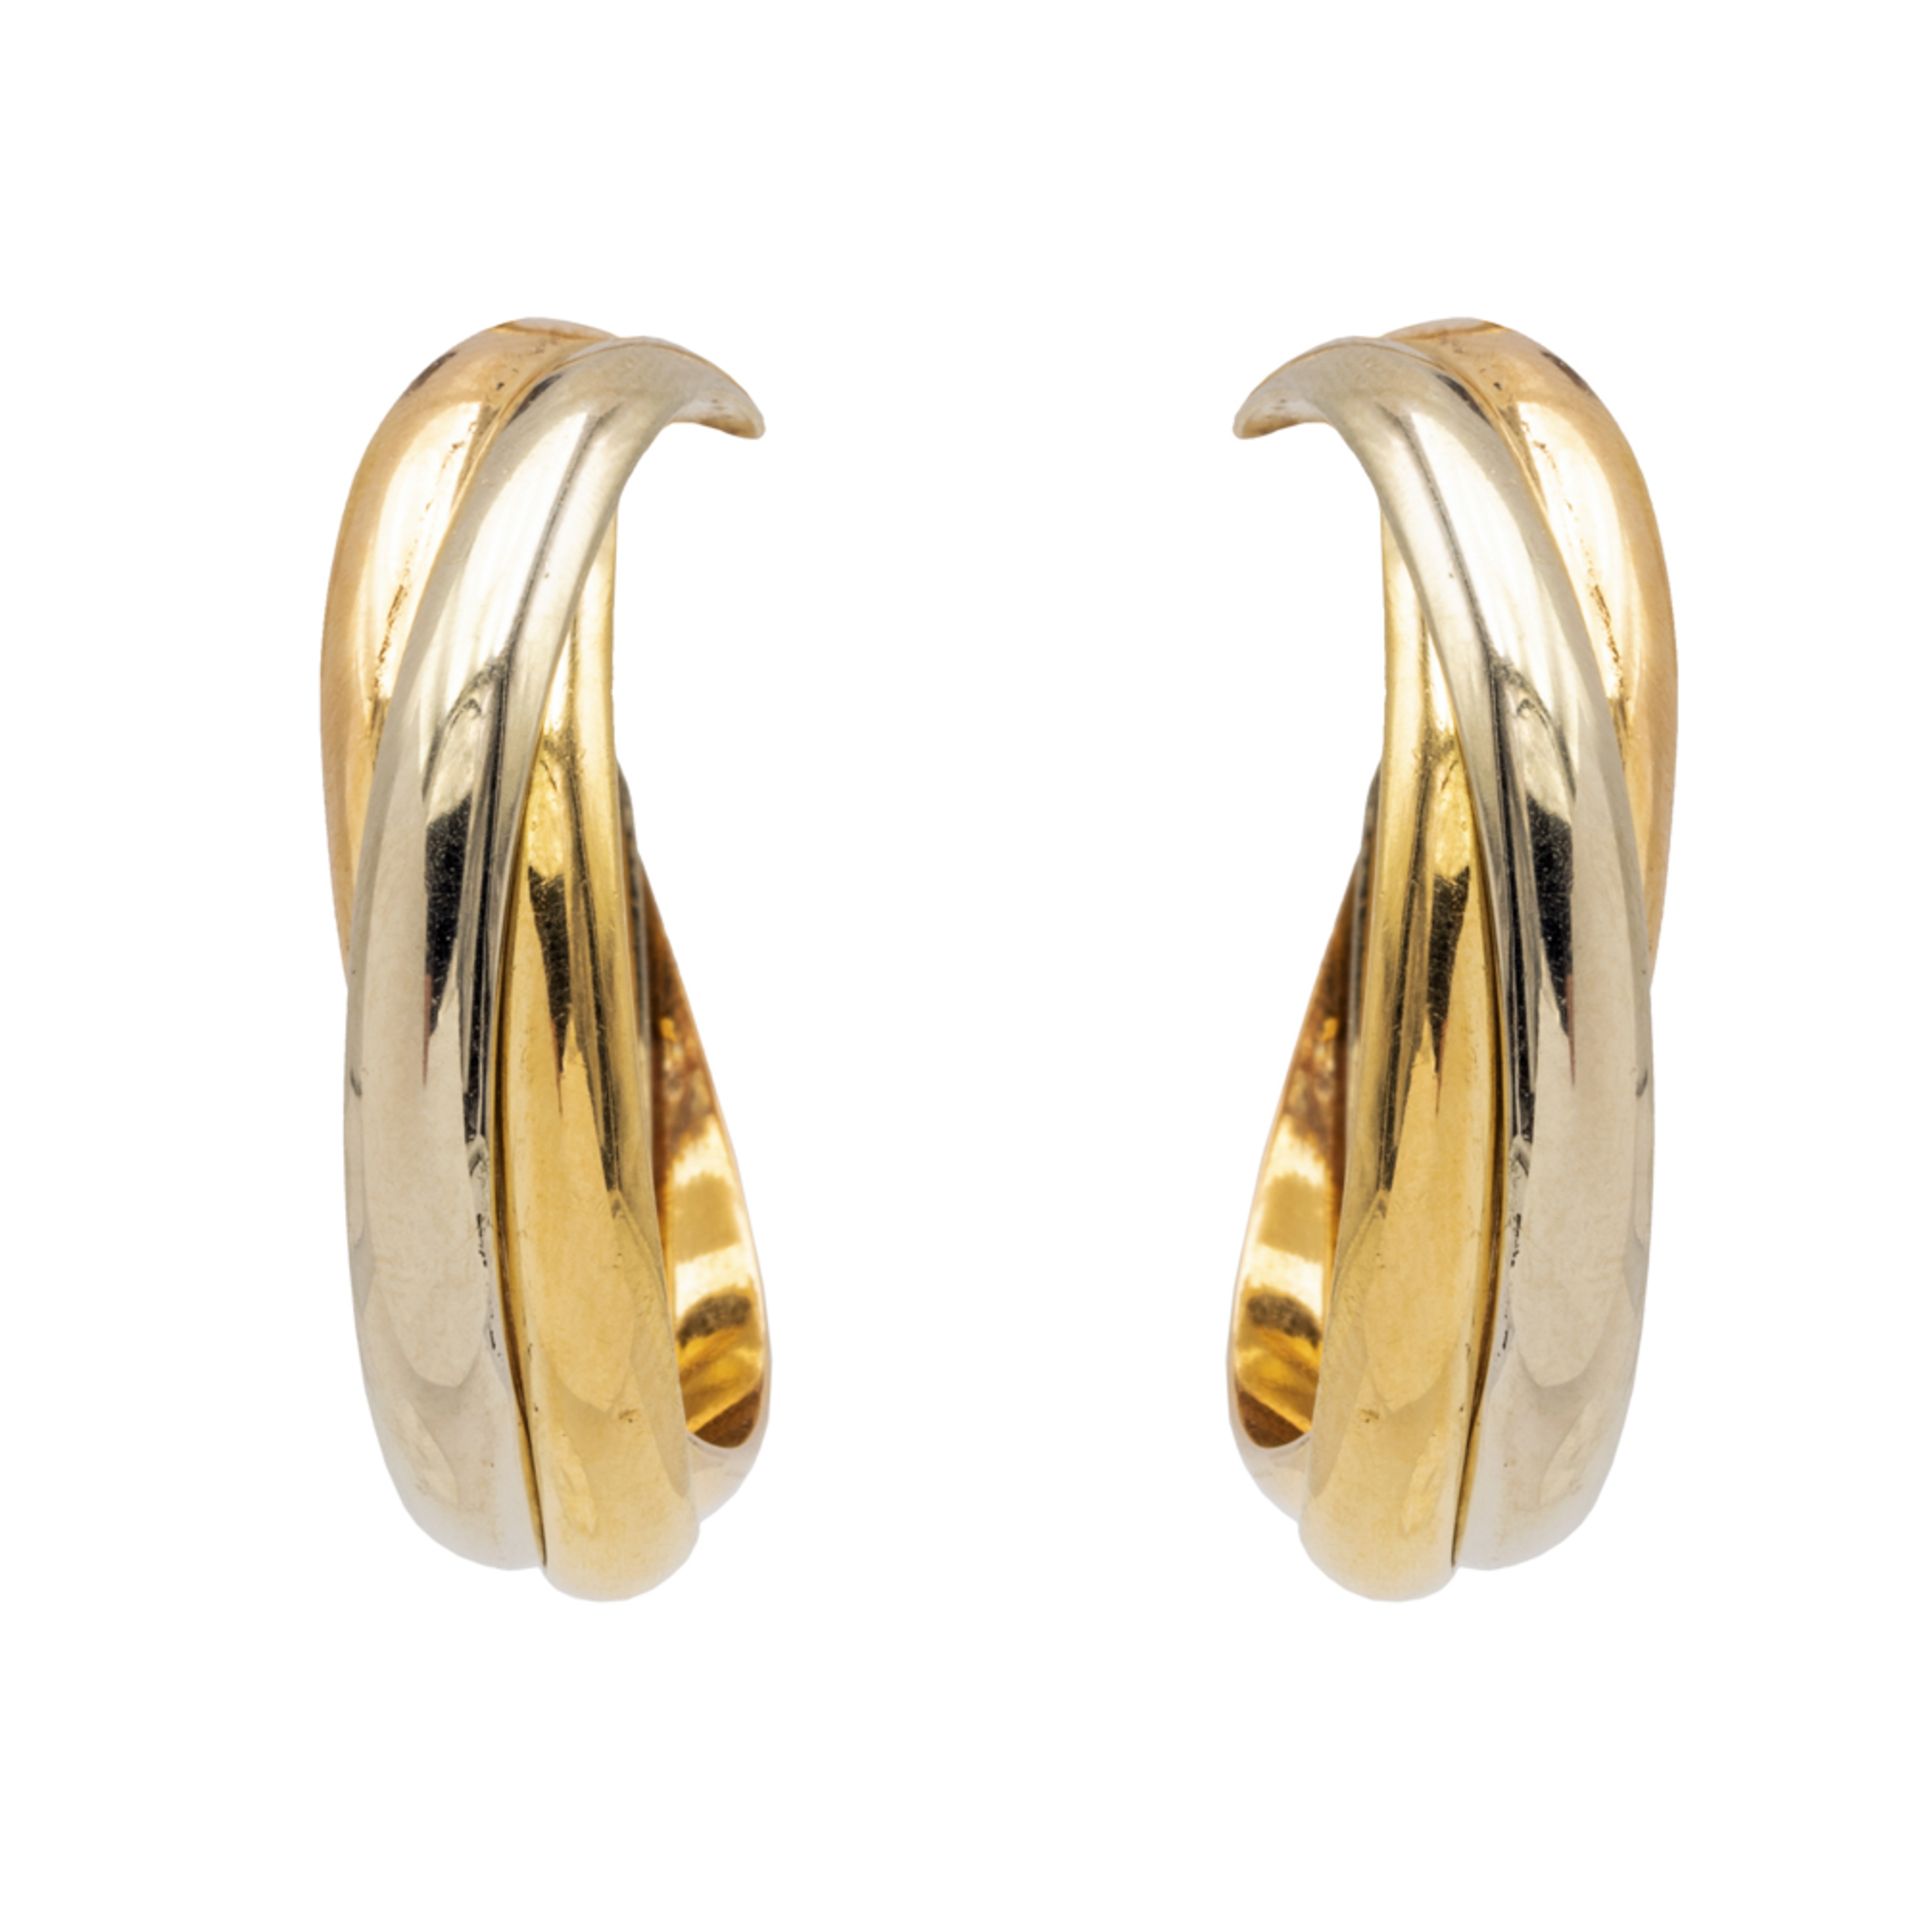 Cartier Trinity collection earrings